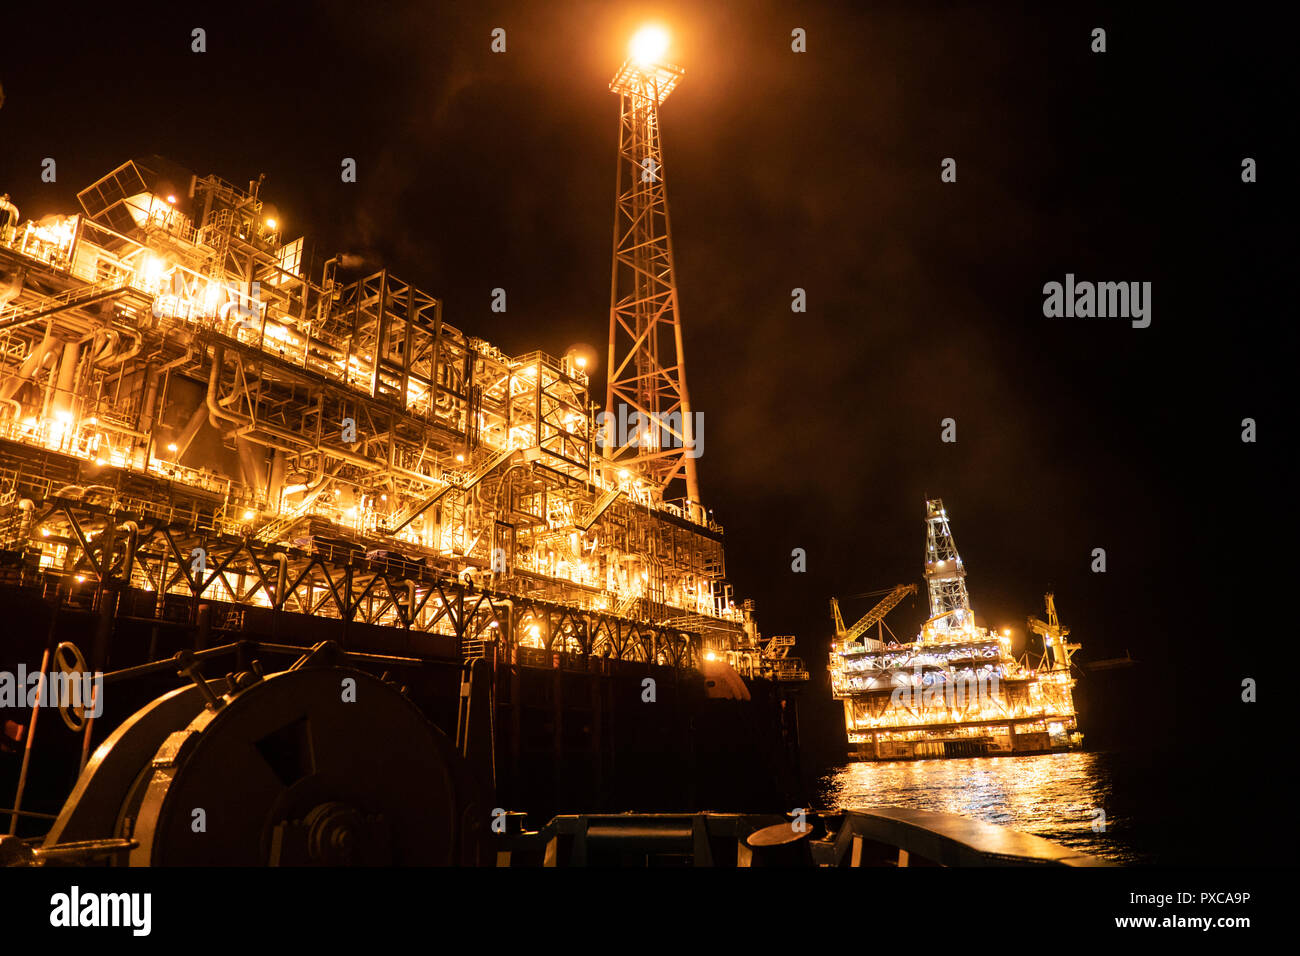 FPSO tanker vessel near Oil platform Rig at night. Offshore oil and gas industry Stock Photo